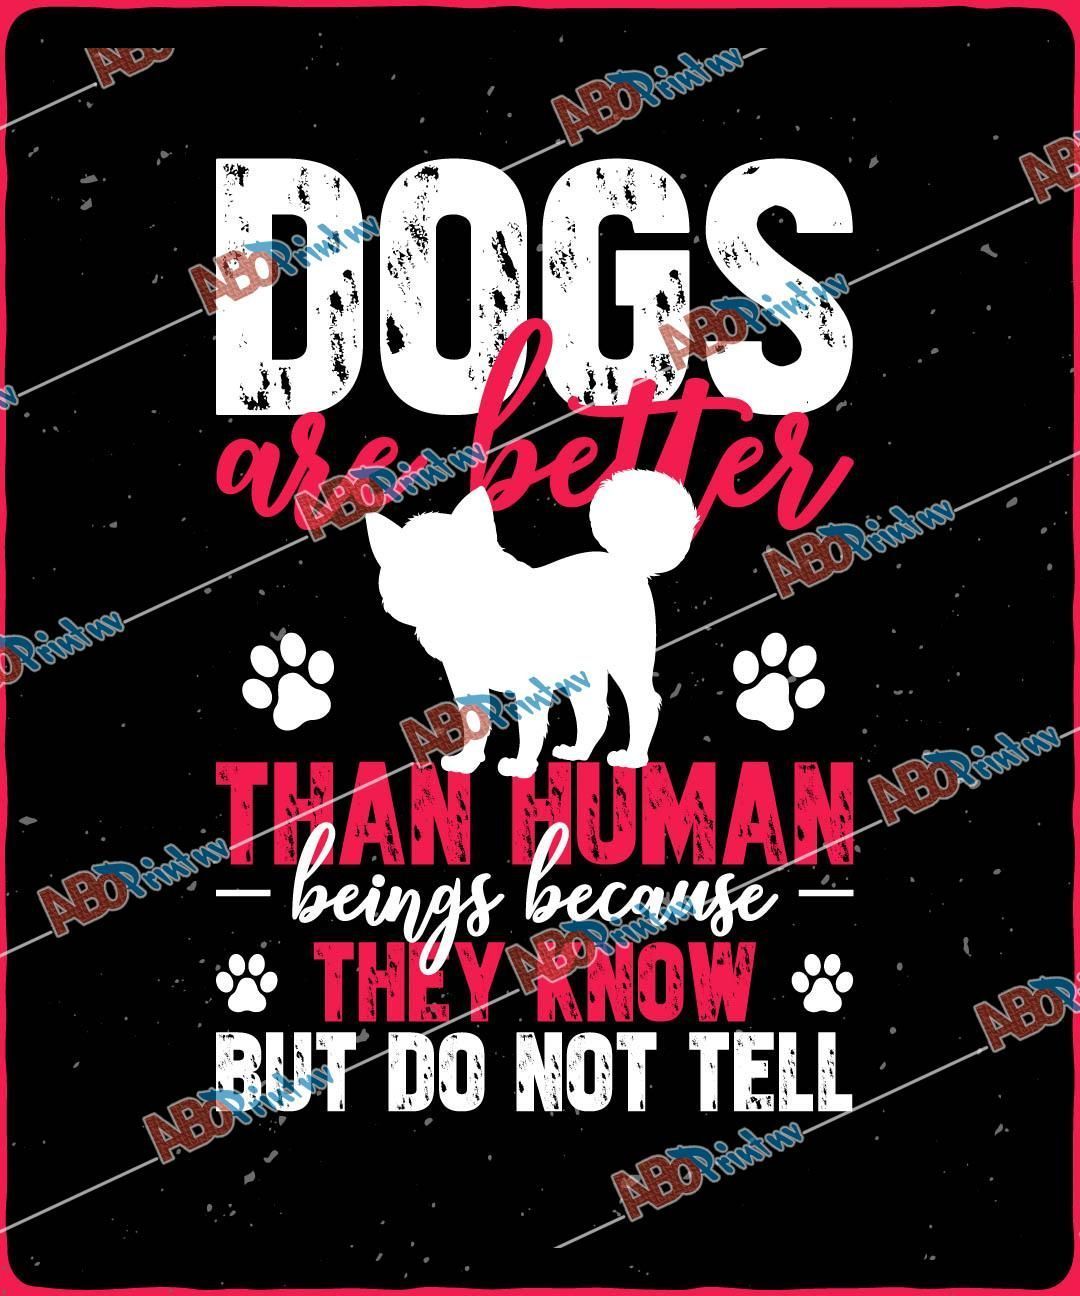 Dogs are better than human beings because they know but do not tellJPG (1).jpg